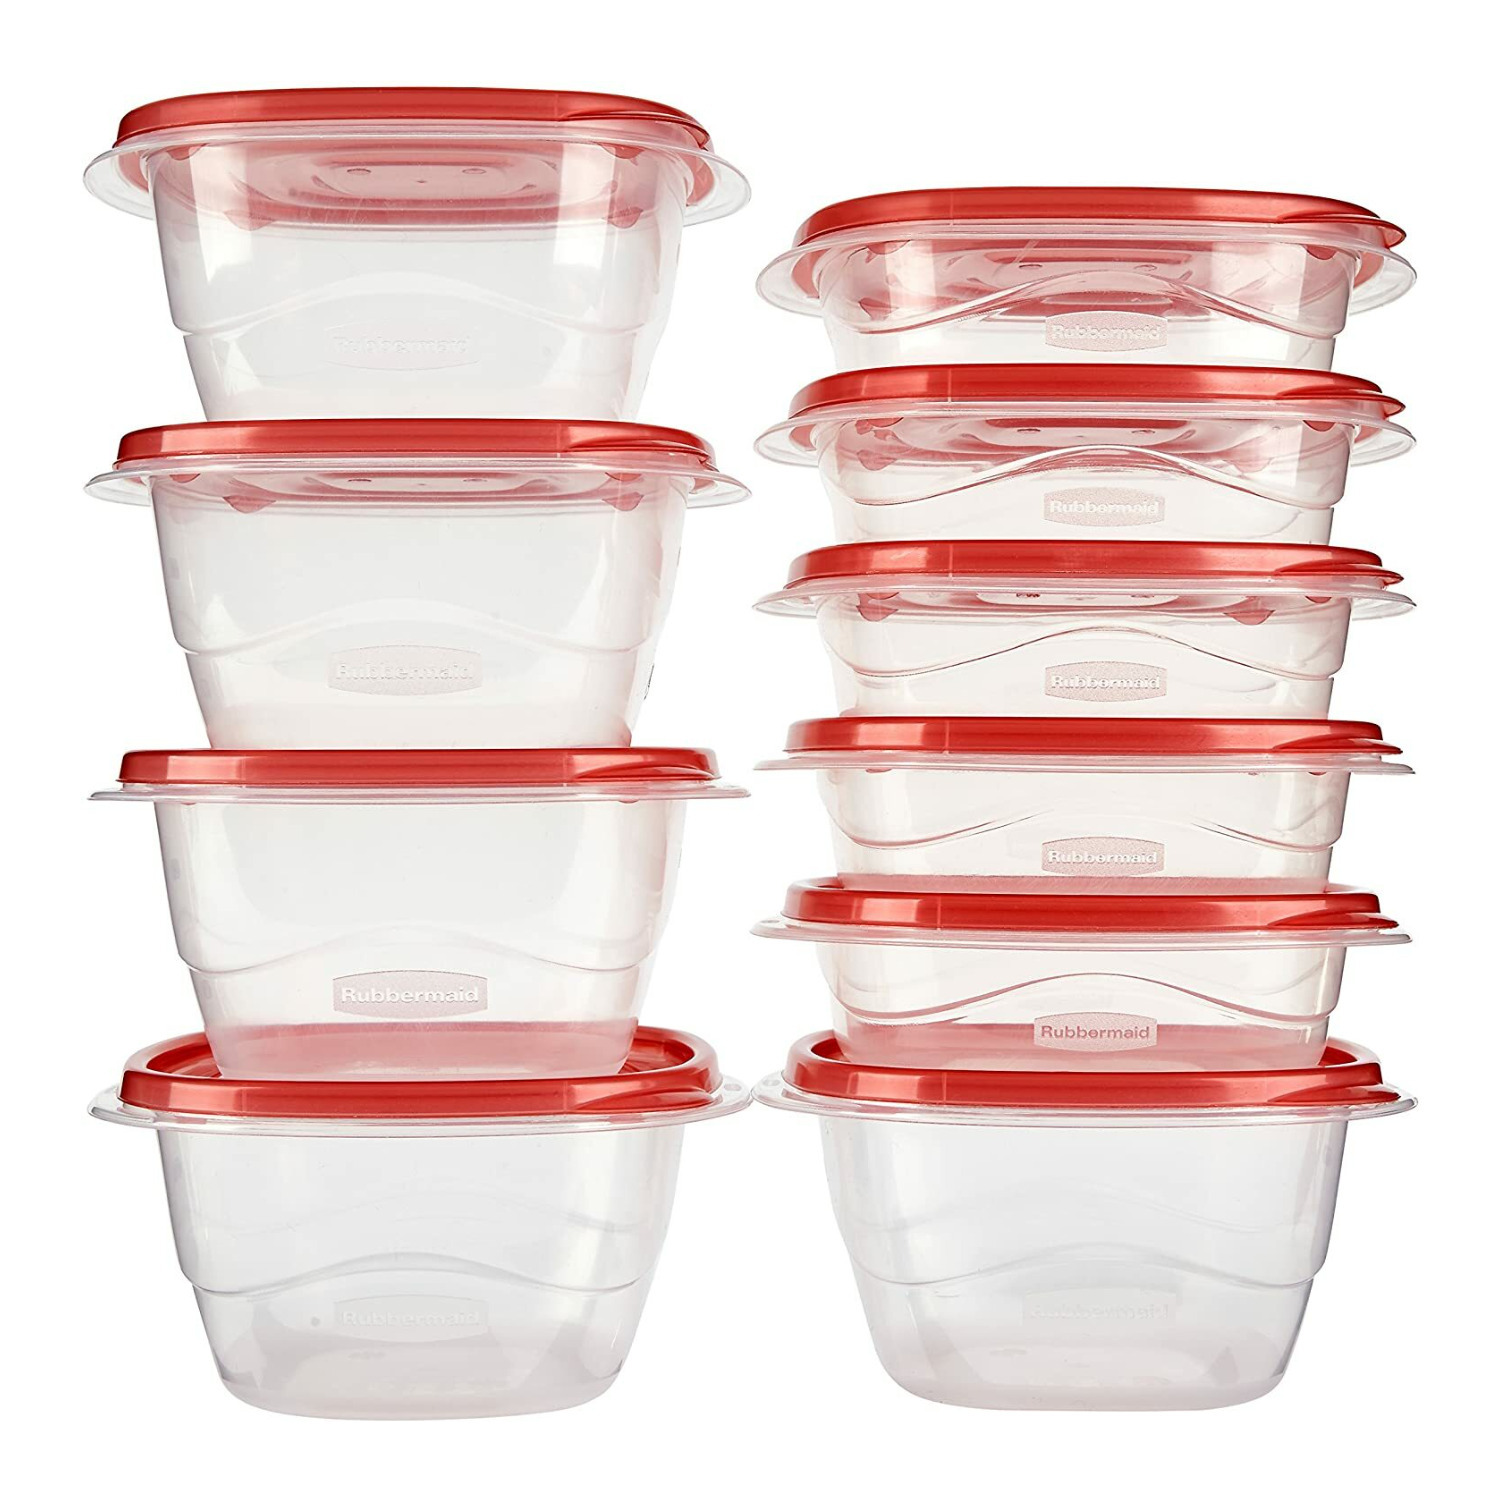 Rubbermaid TakeAlongs Assorted Food Storage Containers, 10-Piece Set, Chili Red (1779055)